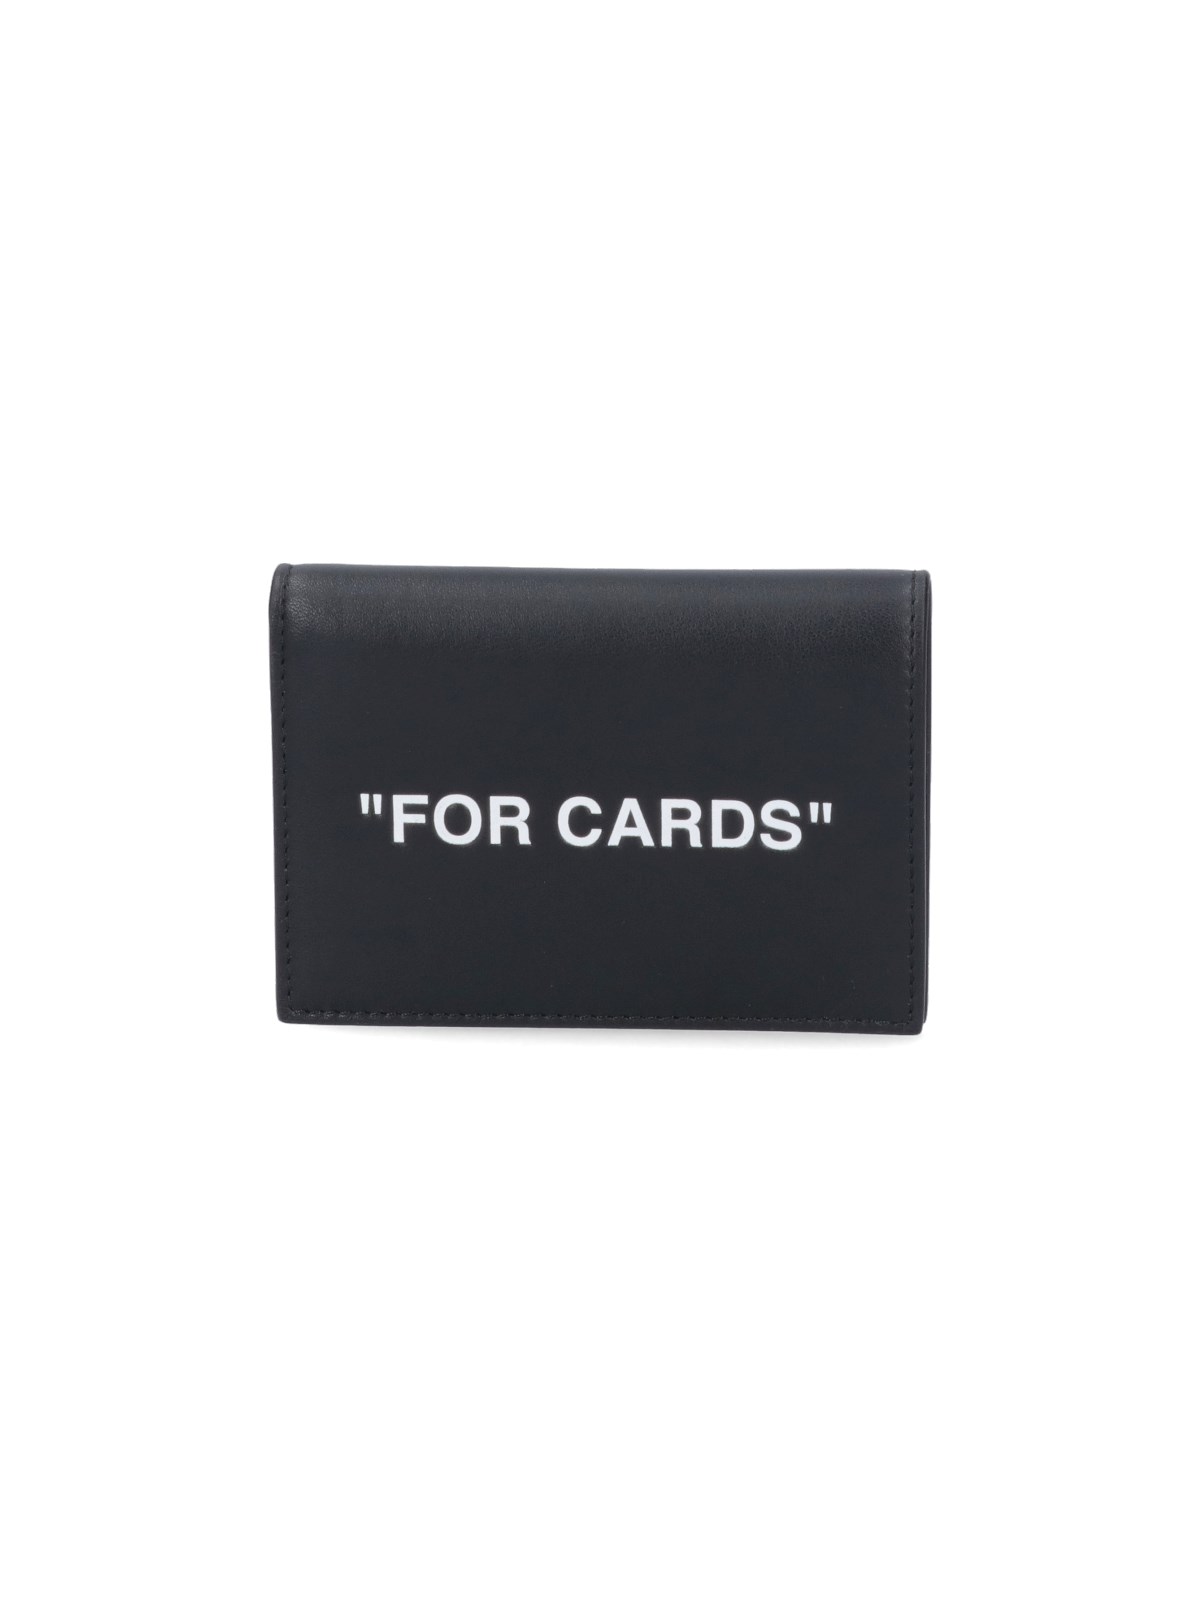 OFF-WHITE WALLET 'FOR CARDS'